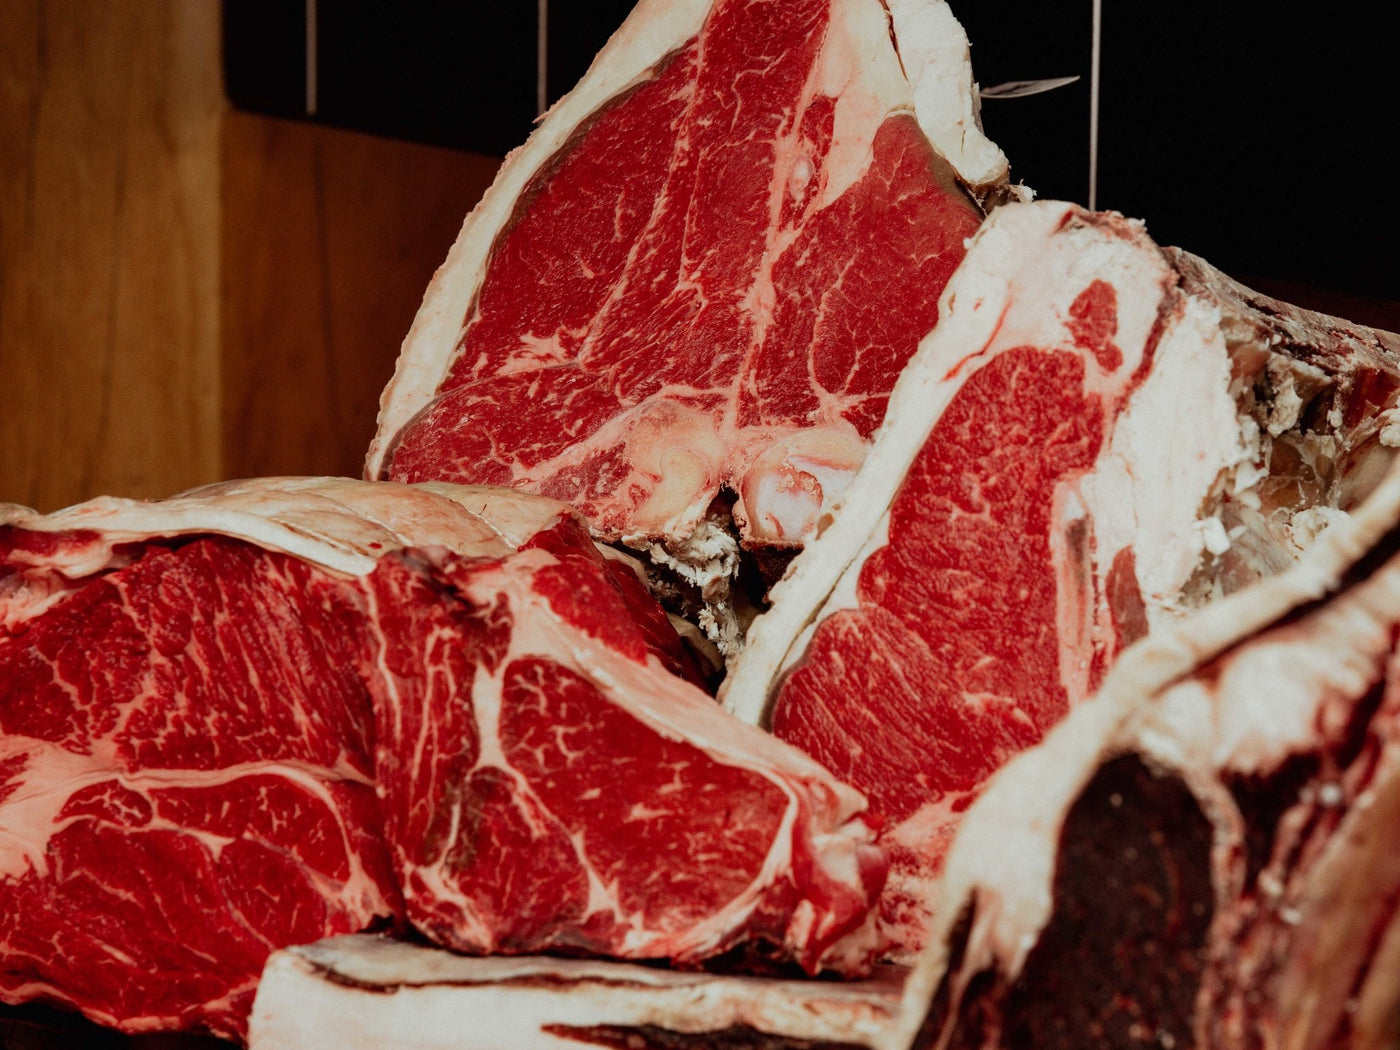 Super 32 Day Dry-Aged Trenchmore Wagyu x Sussex - Thomas Joseph Butchery - Ethical Dry-Aged Meat The Best Steak UK Thomas Joseph Butchery